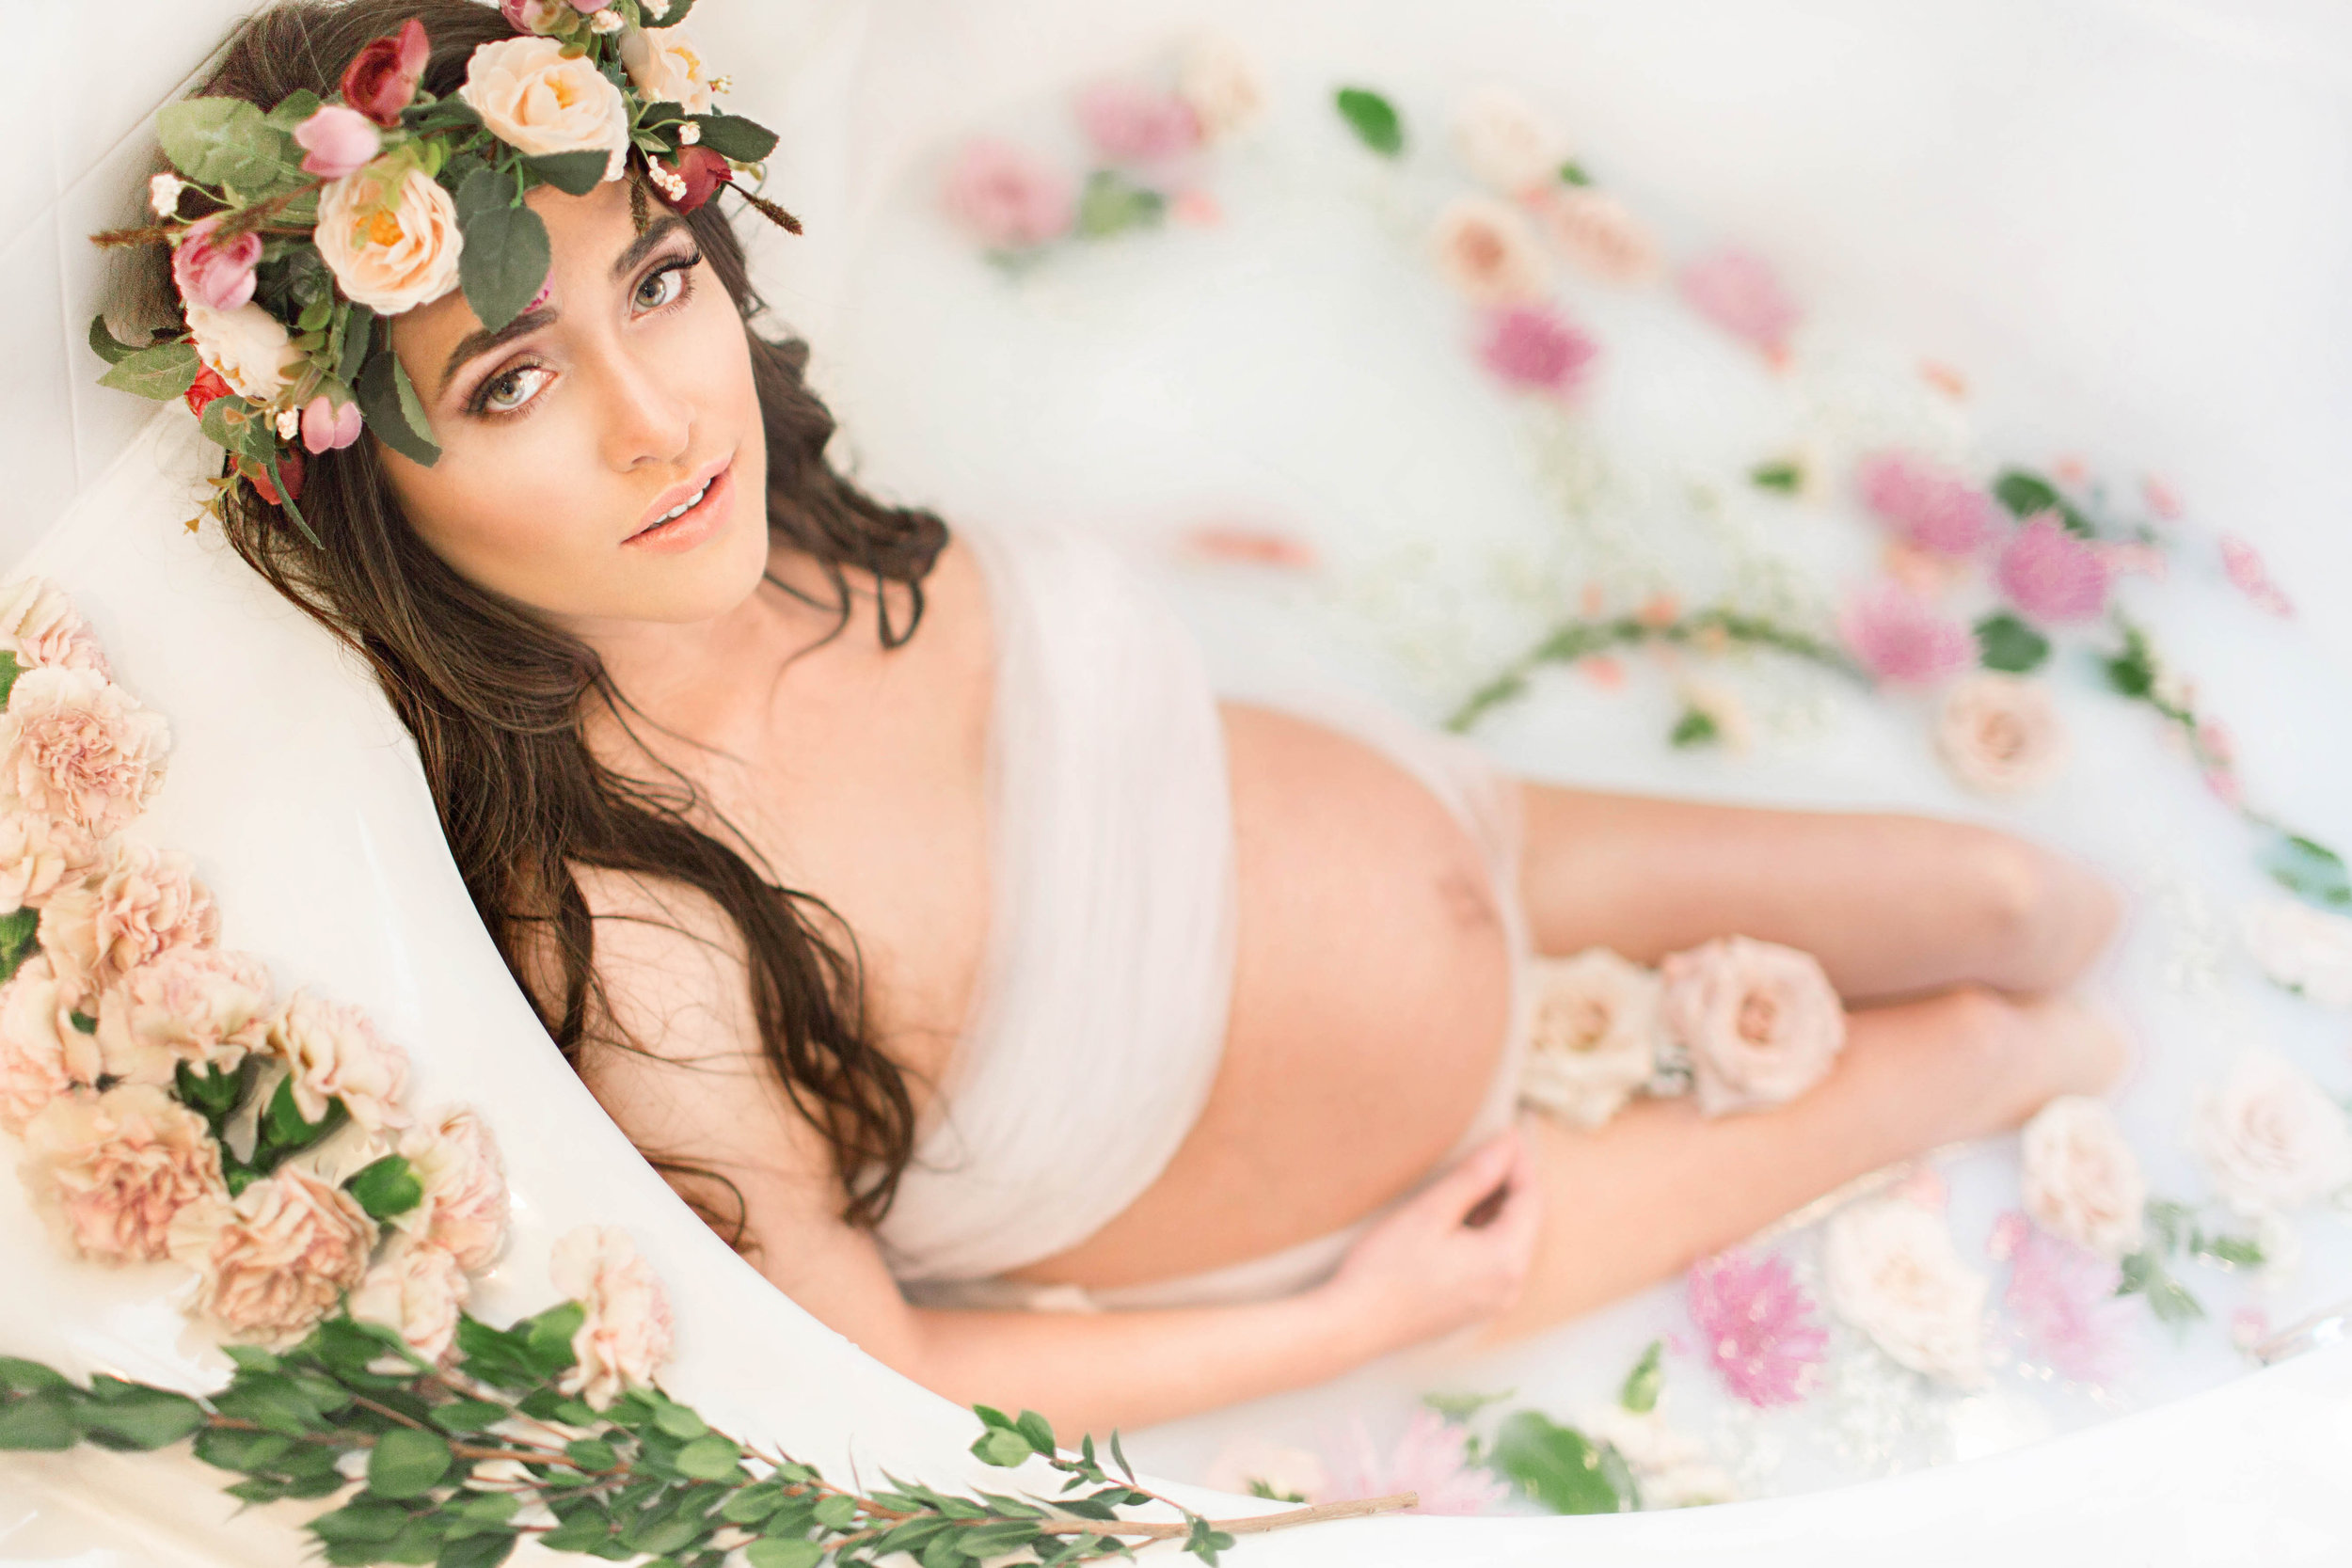 What is a maternity milk bath session?